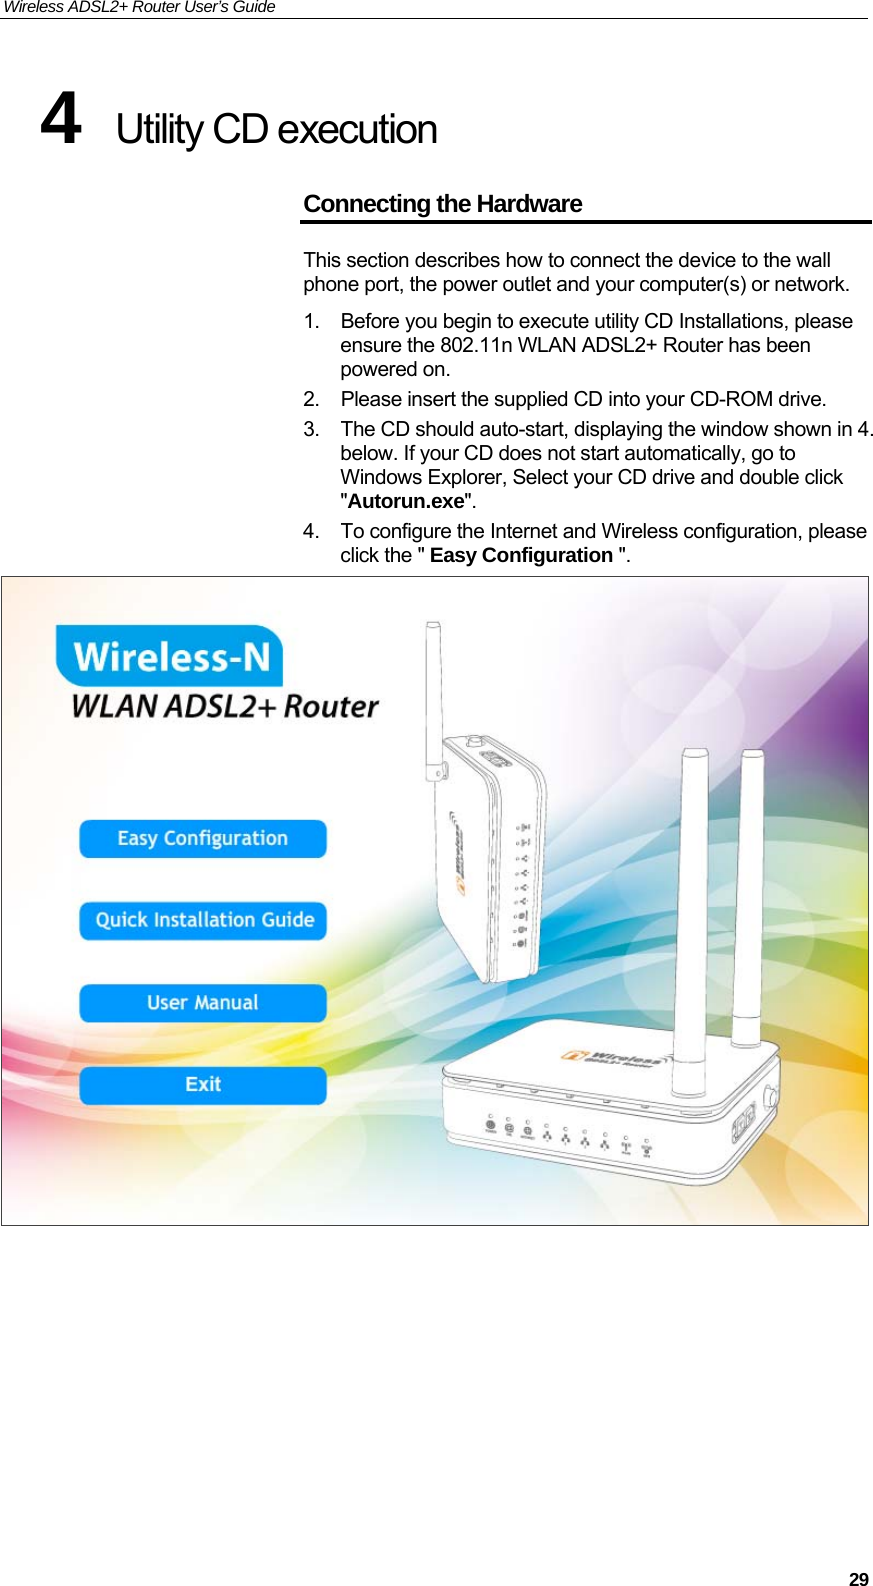 Wireless ADSL2+ Router User’s Guide     294  Utility CD execution  Connecting the Hardware This section describes how to connect the device to the wall phone port, the power outlet and your computer(s) or network. 1.  Before you begin to execute utility CD Installations, please ensure the 802.11n WLAN ADSL2+ Router has been powered on. 2. Please insert the supplied CD into your CD-ROM drive. 3.  The CD should auto-start, displaying the window shown in 4. below. If your CD does not start automatically, go to Windows Explorer, Select your CD drive and double click &quot;Autorun.exe&quot;. 4.  To configure the Internet and Wireless configuration, please click the &quot; Easy Configuration &quot;.        